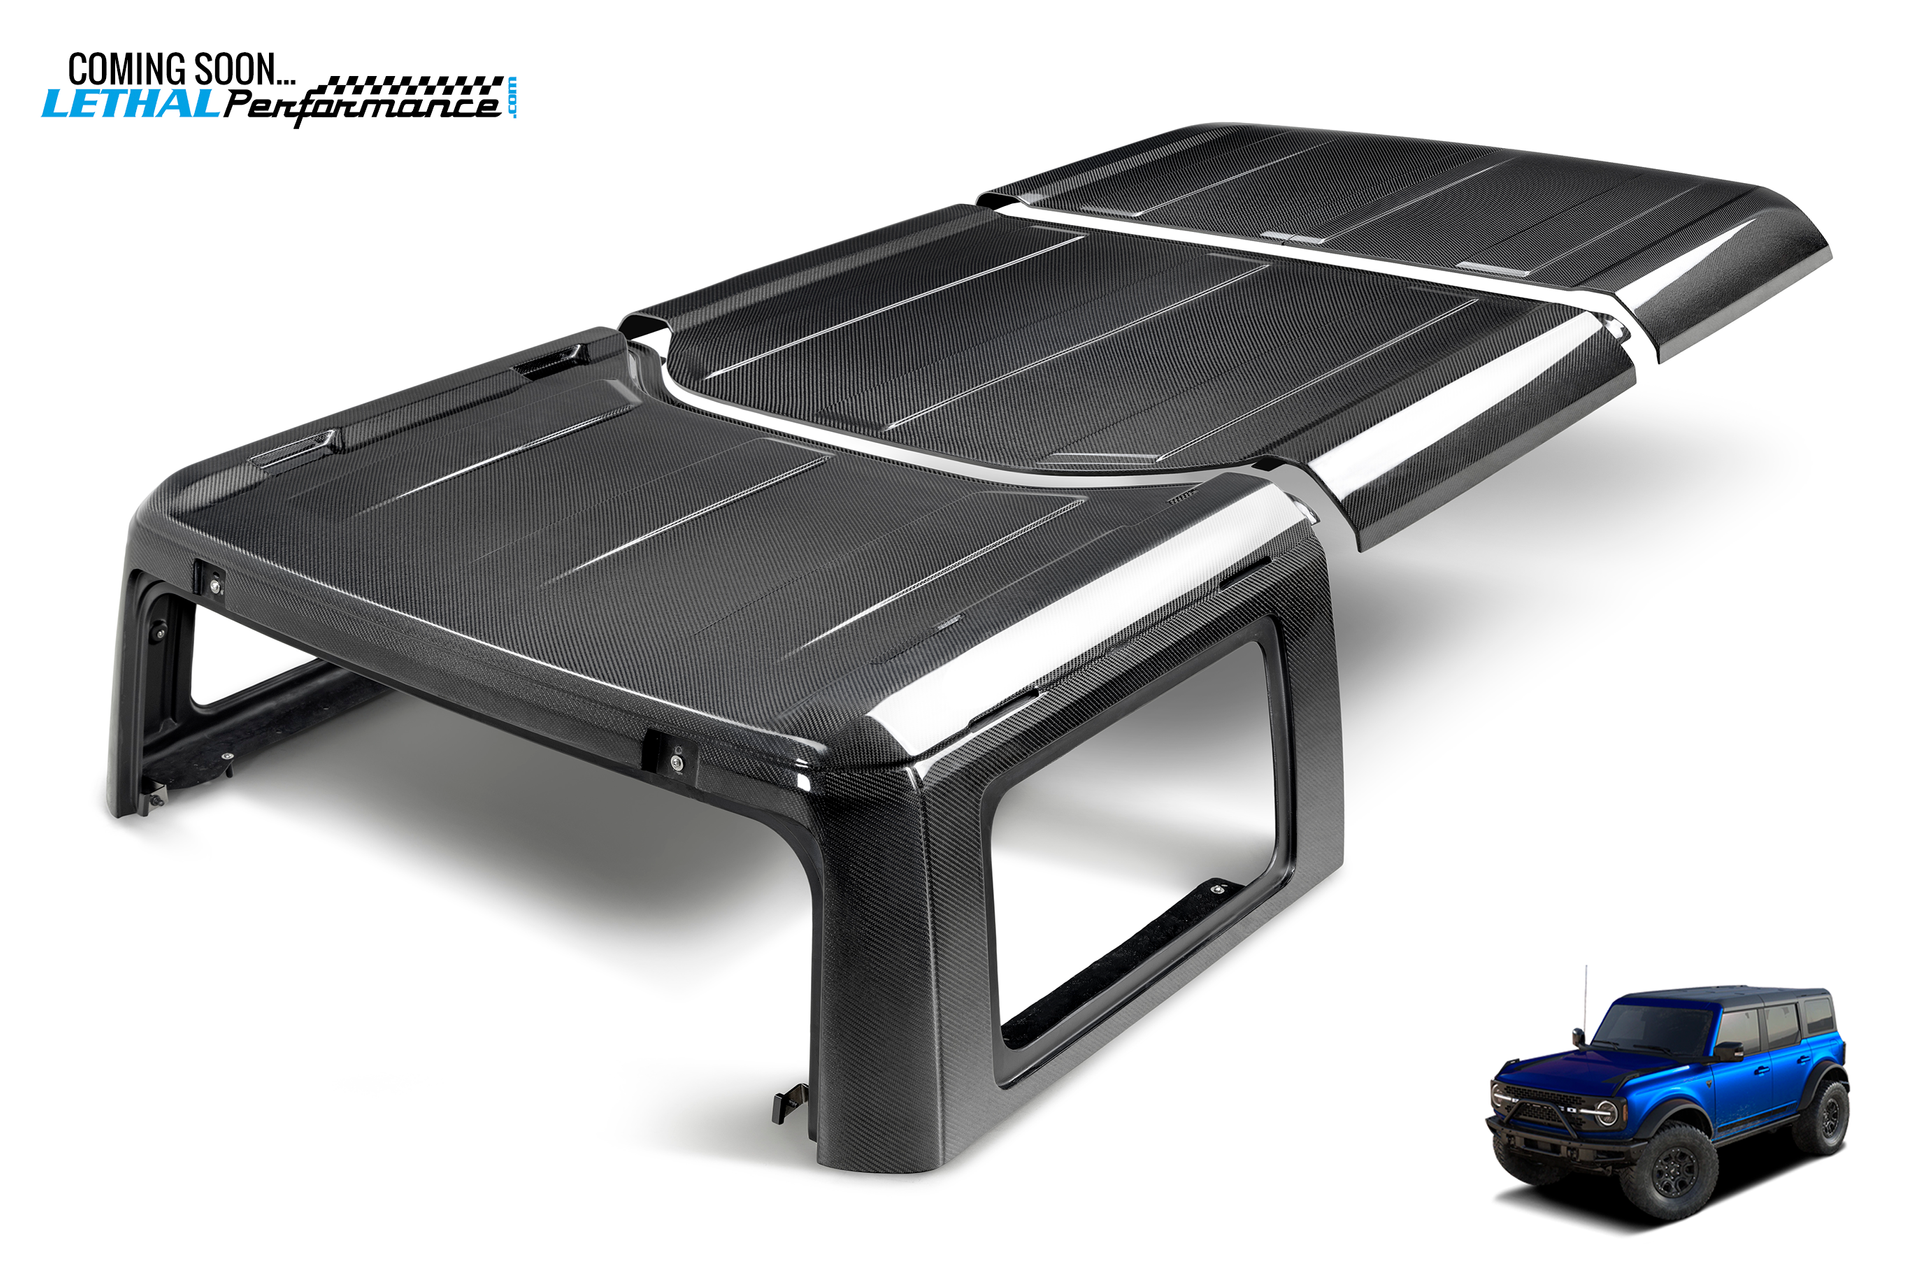 Ford Bronco CARBON FIBER ROOF! Sneak Peek from Anderson Composites - Lethal Performance 43a24cda861b7b7305336d876aa7d9c23b9623c7_92d3dbcf22b9a44981118ddf514d0c46c790049b_facebook